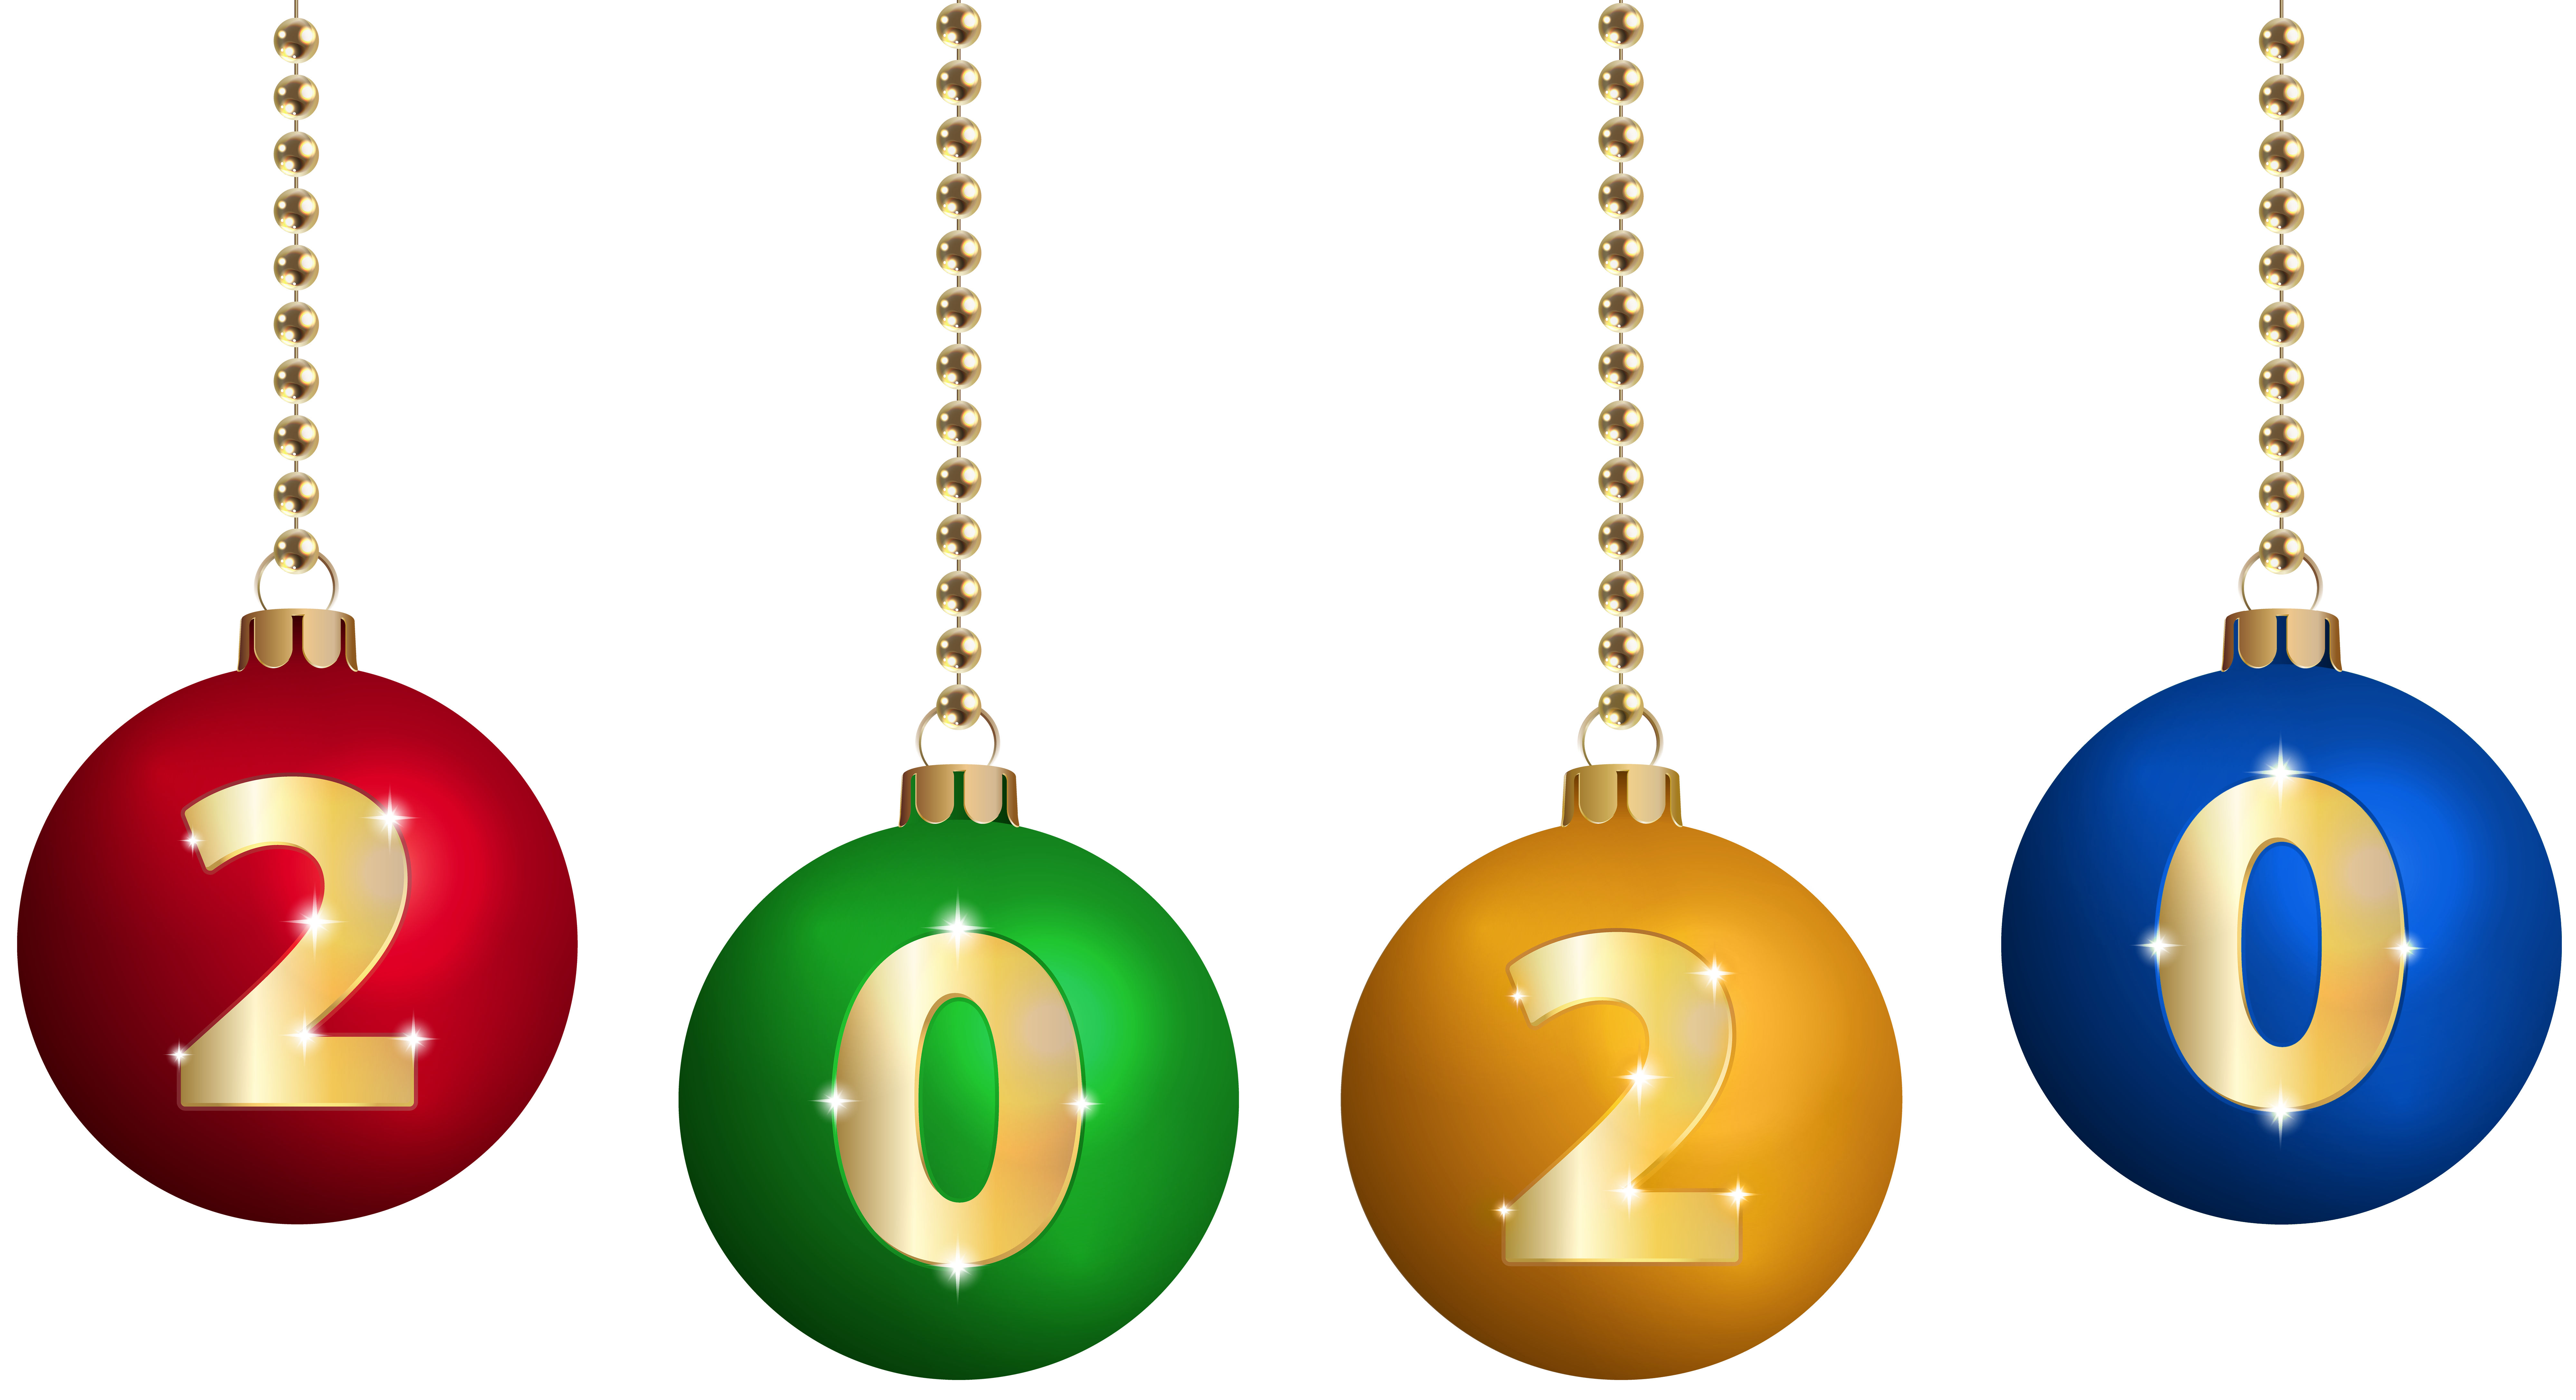 2020 On Christmas Balls Transparent Clip Art Gallery Yopriceville High Quality Images And Transparent Png Free Clipart